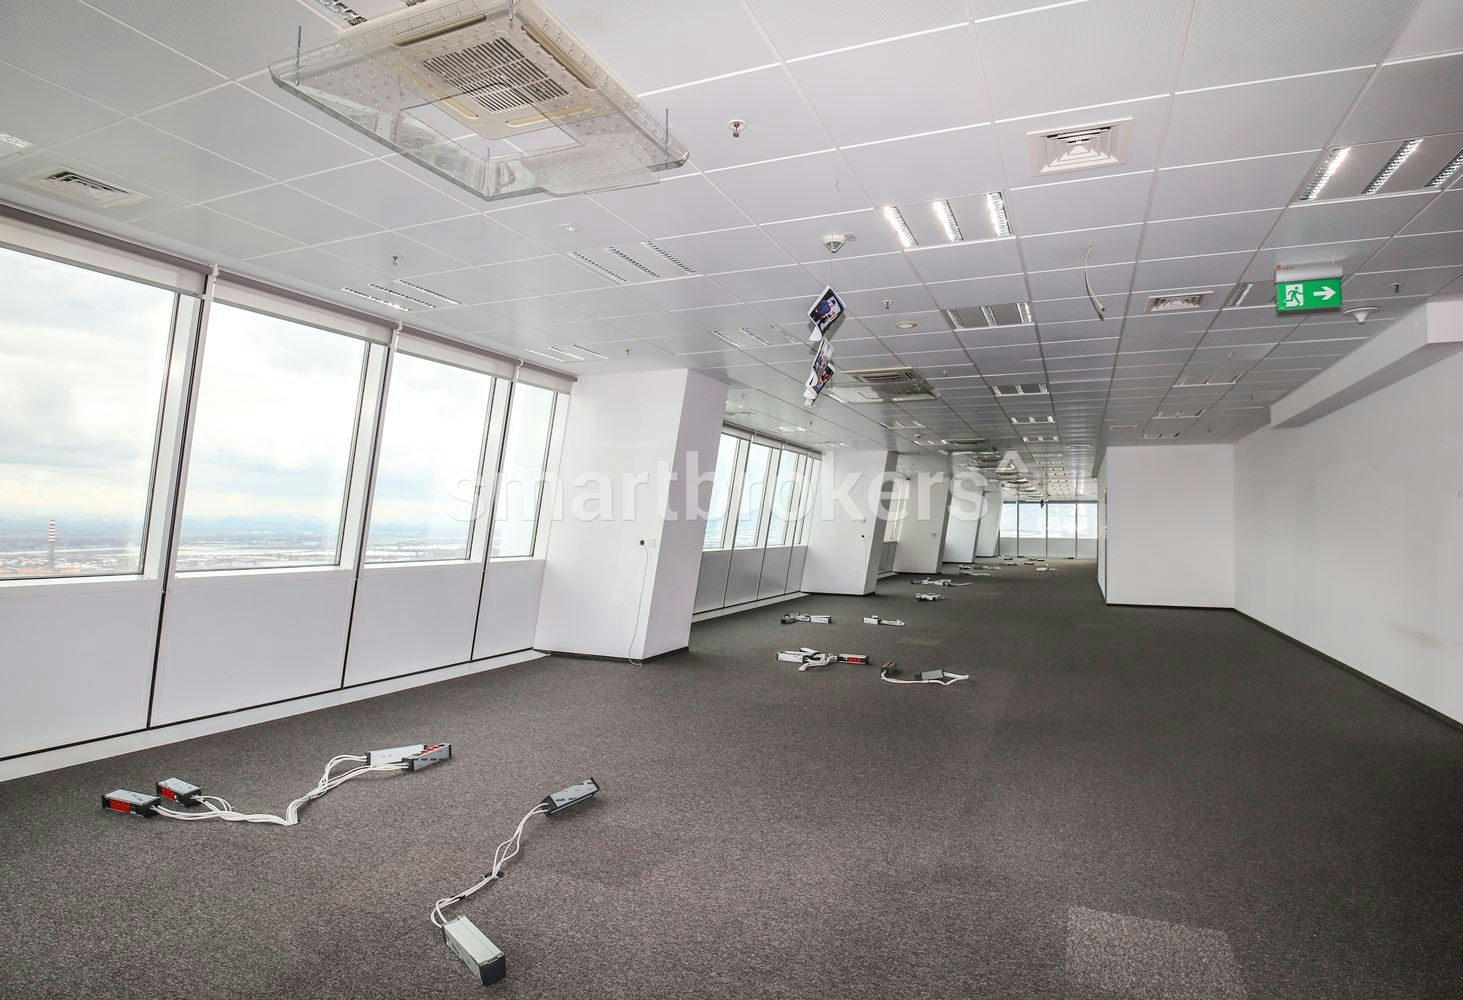 Office for rent with panoramic 360 degree views located on the 21st floor of the iconic business building - Capital Fort